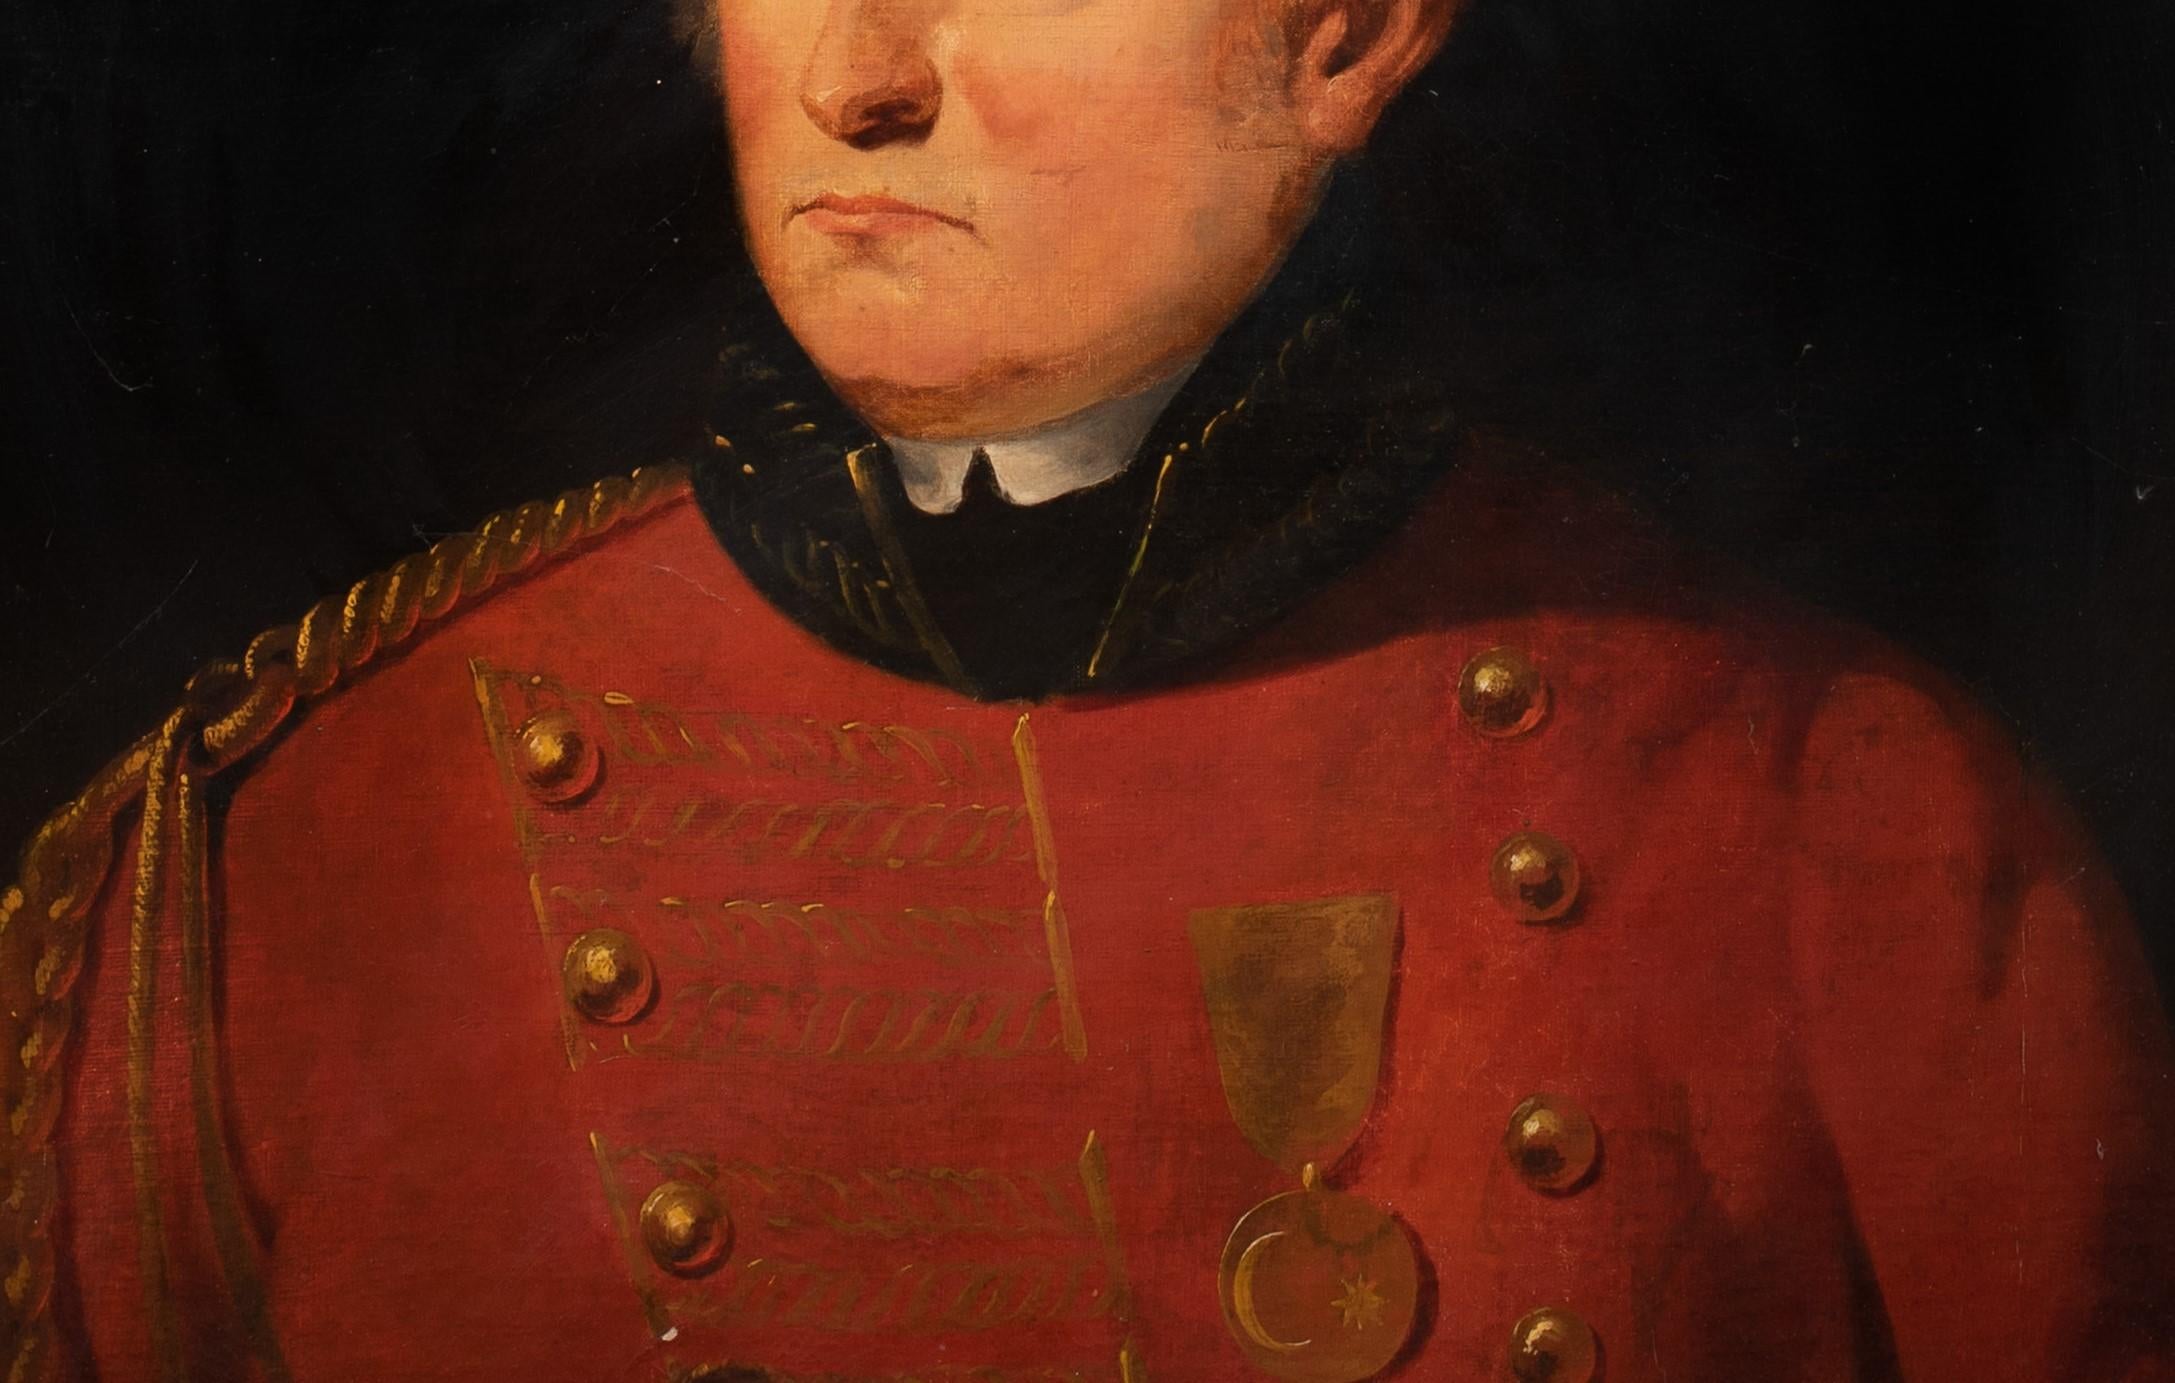 Lt. General Sir John Moore With Sultan's Medal for Egypt, 18th Century - Brown Portrait Painting by Unknown